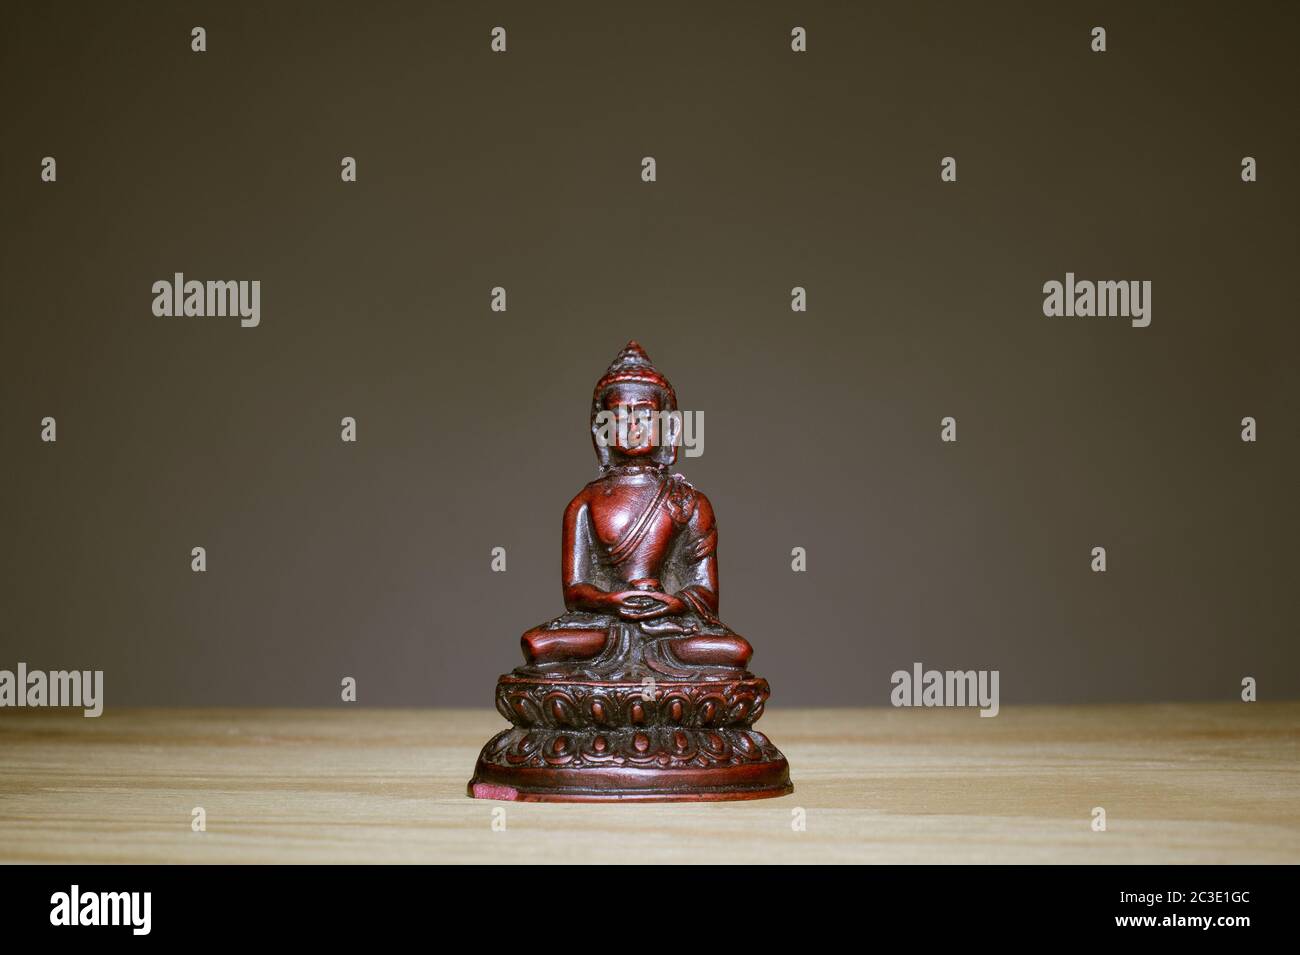 Small figurine of Buddha on wooden desk. Unicolor grey background. Pose of meditation and relaxation. Copy space Stock Photo